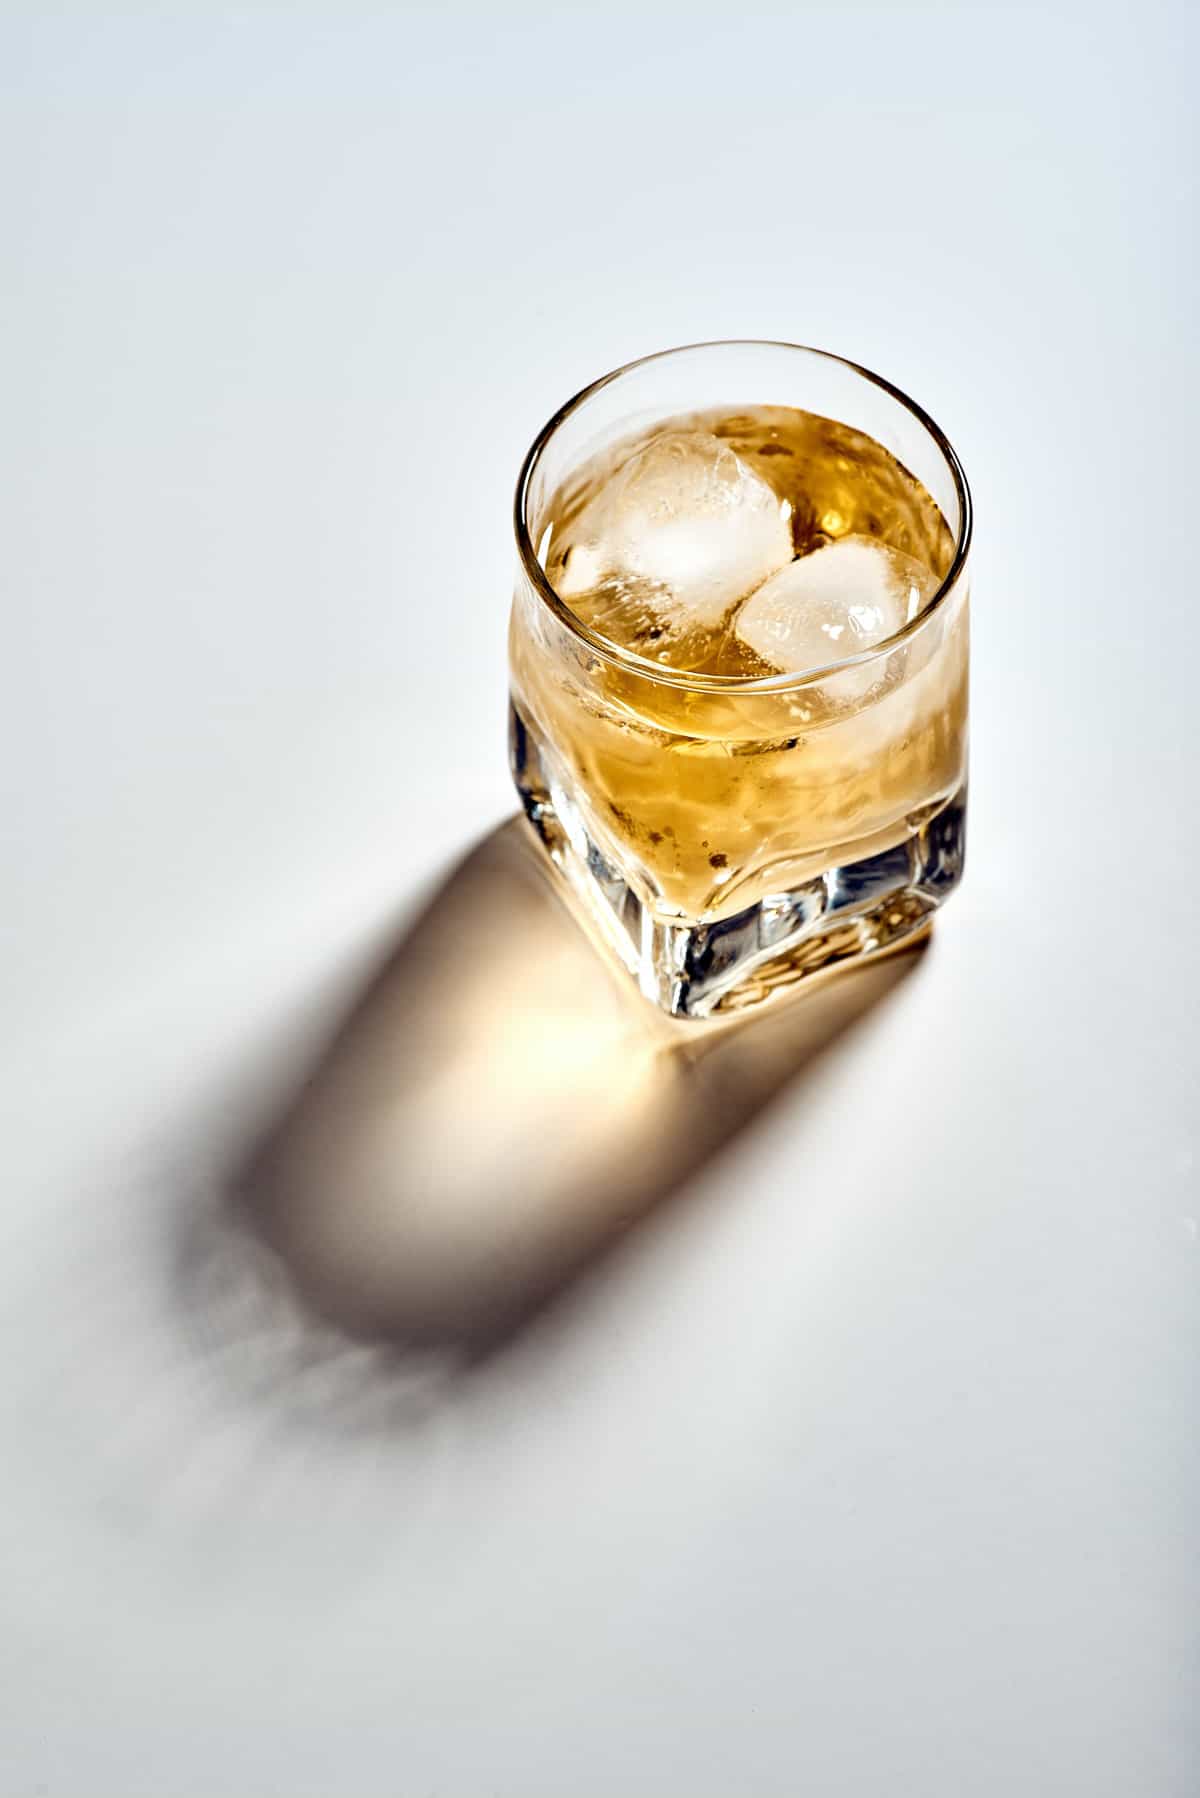 A glass of liquor on the rocks on a white background.